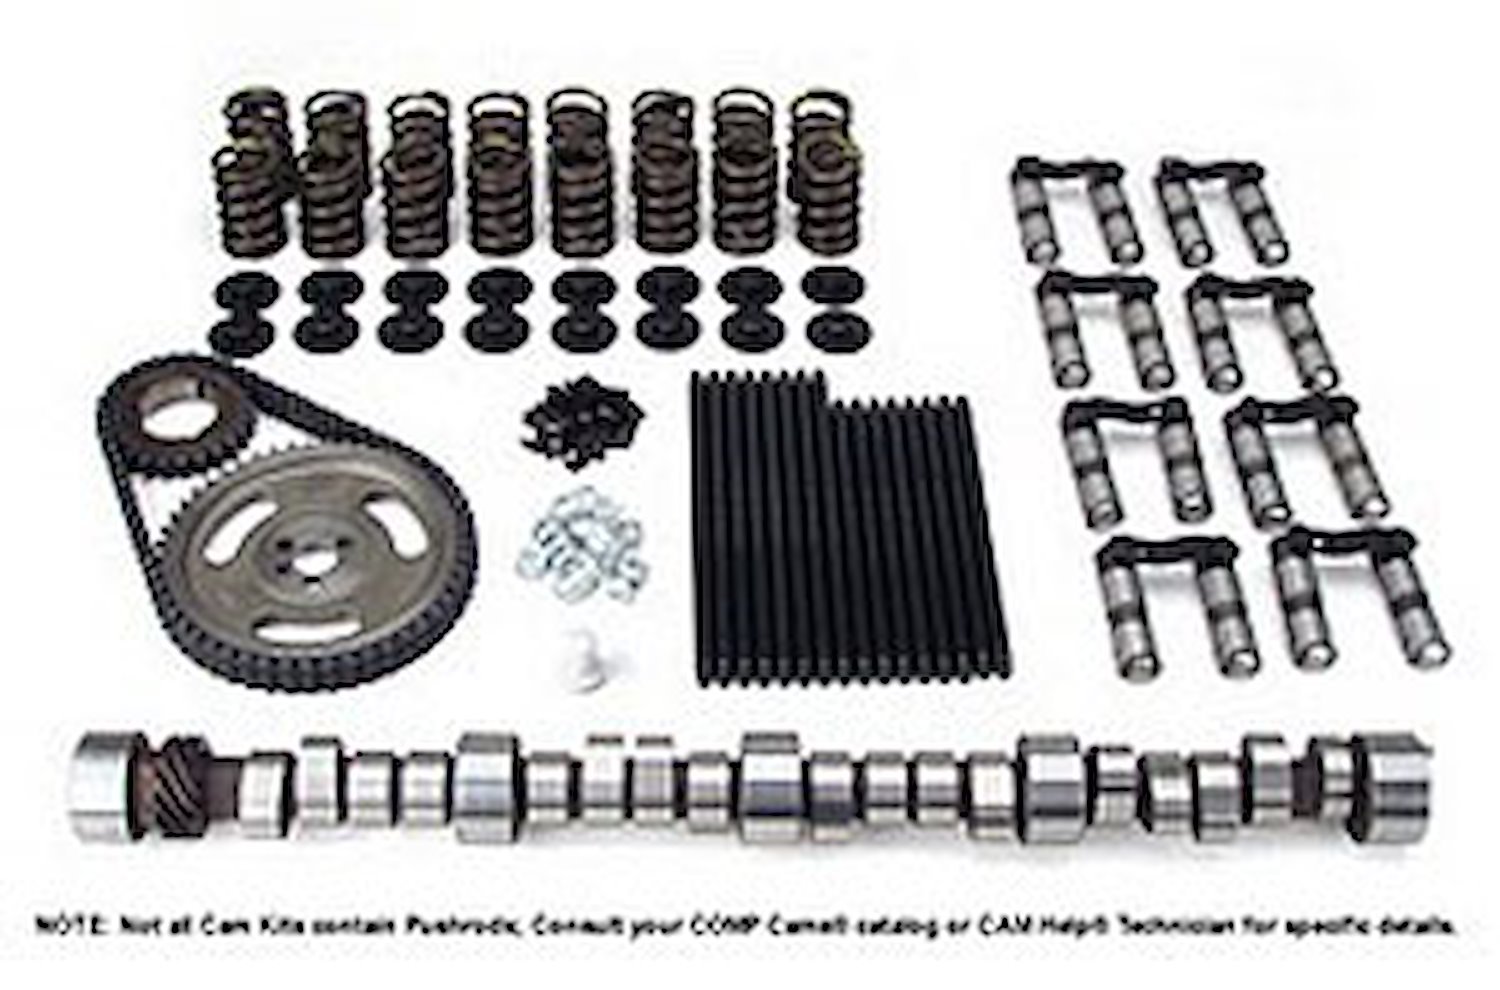 Nitrous HP Hyd. Roller Cam Complete Kit Chevy Big Block 396-454ci 1965-96 Retro-Fit Lift: .566"/.575"